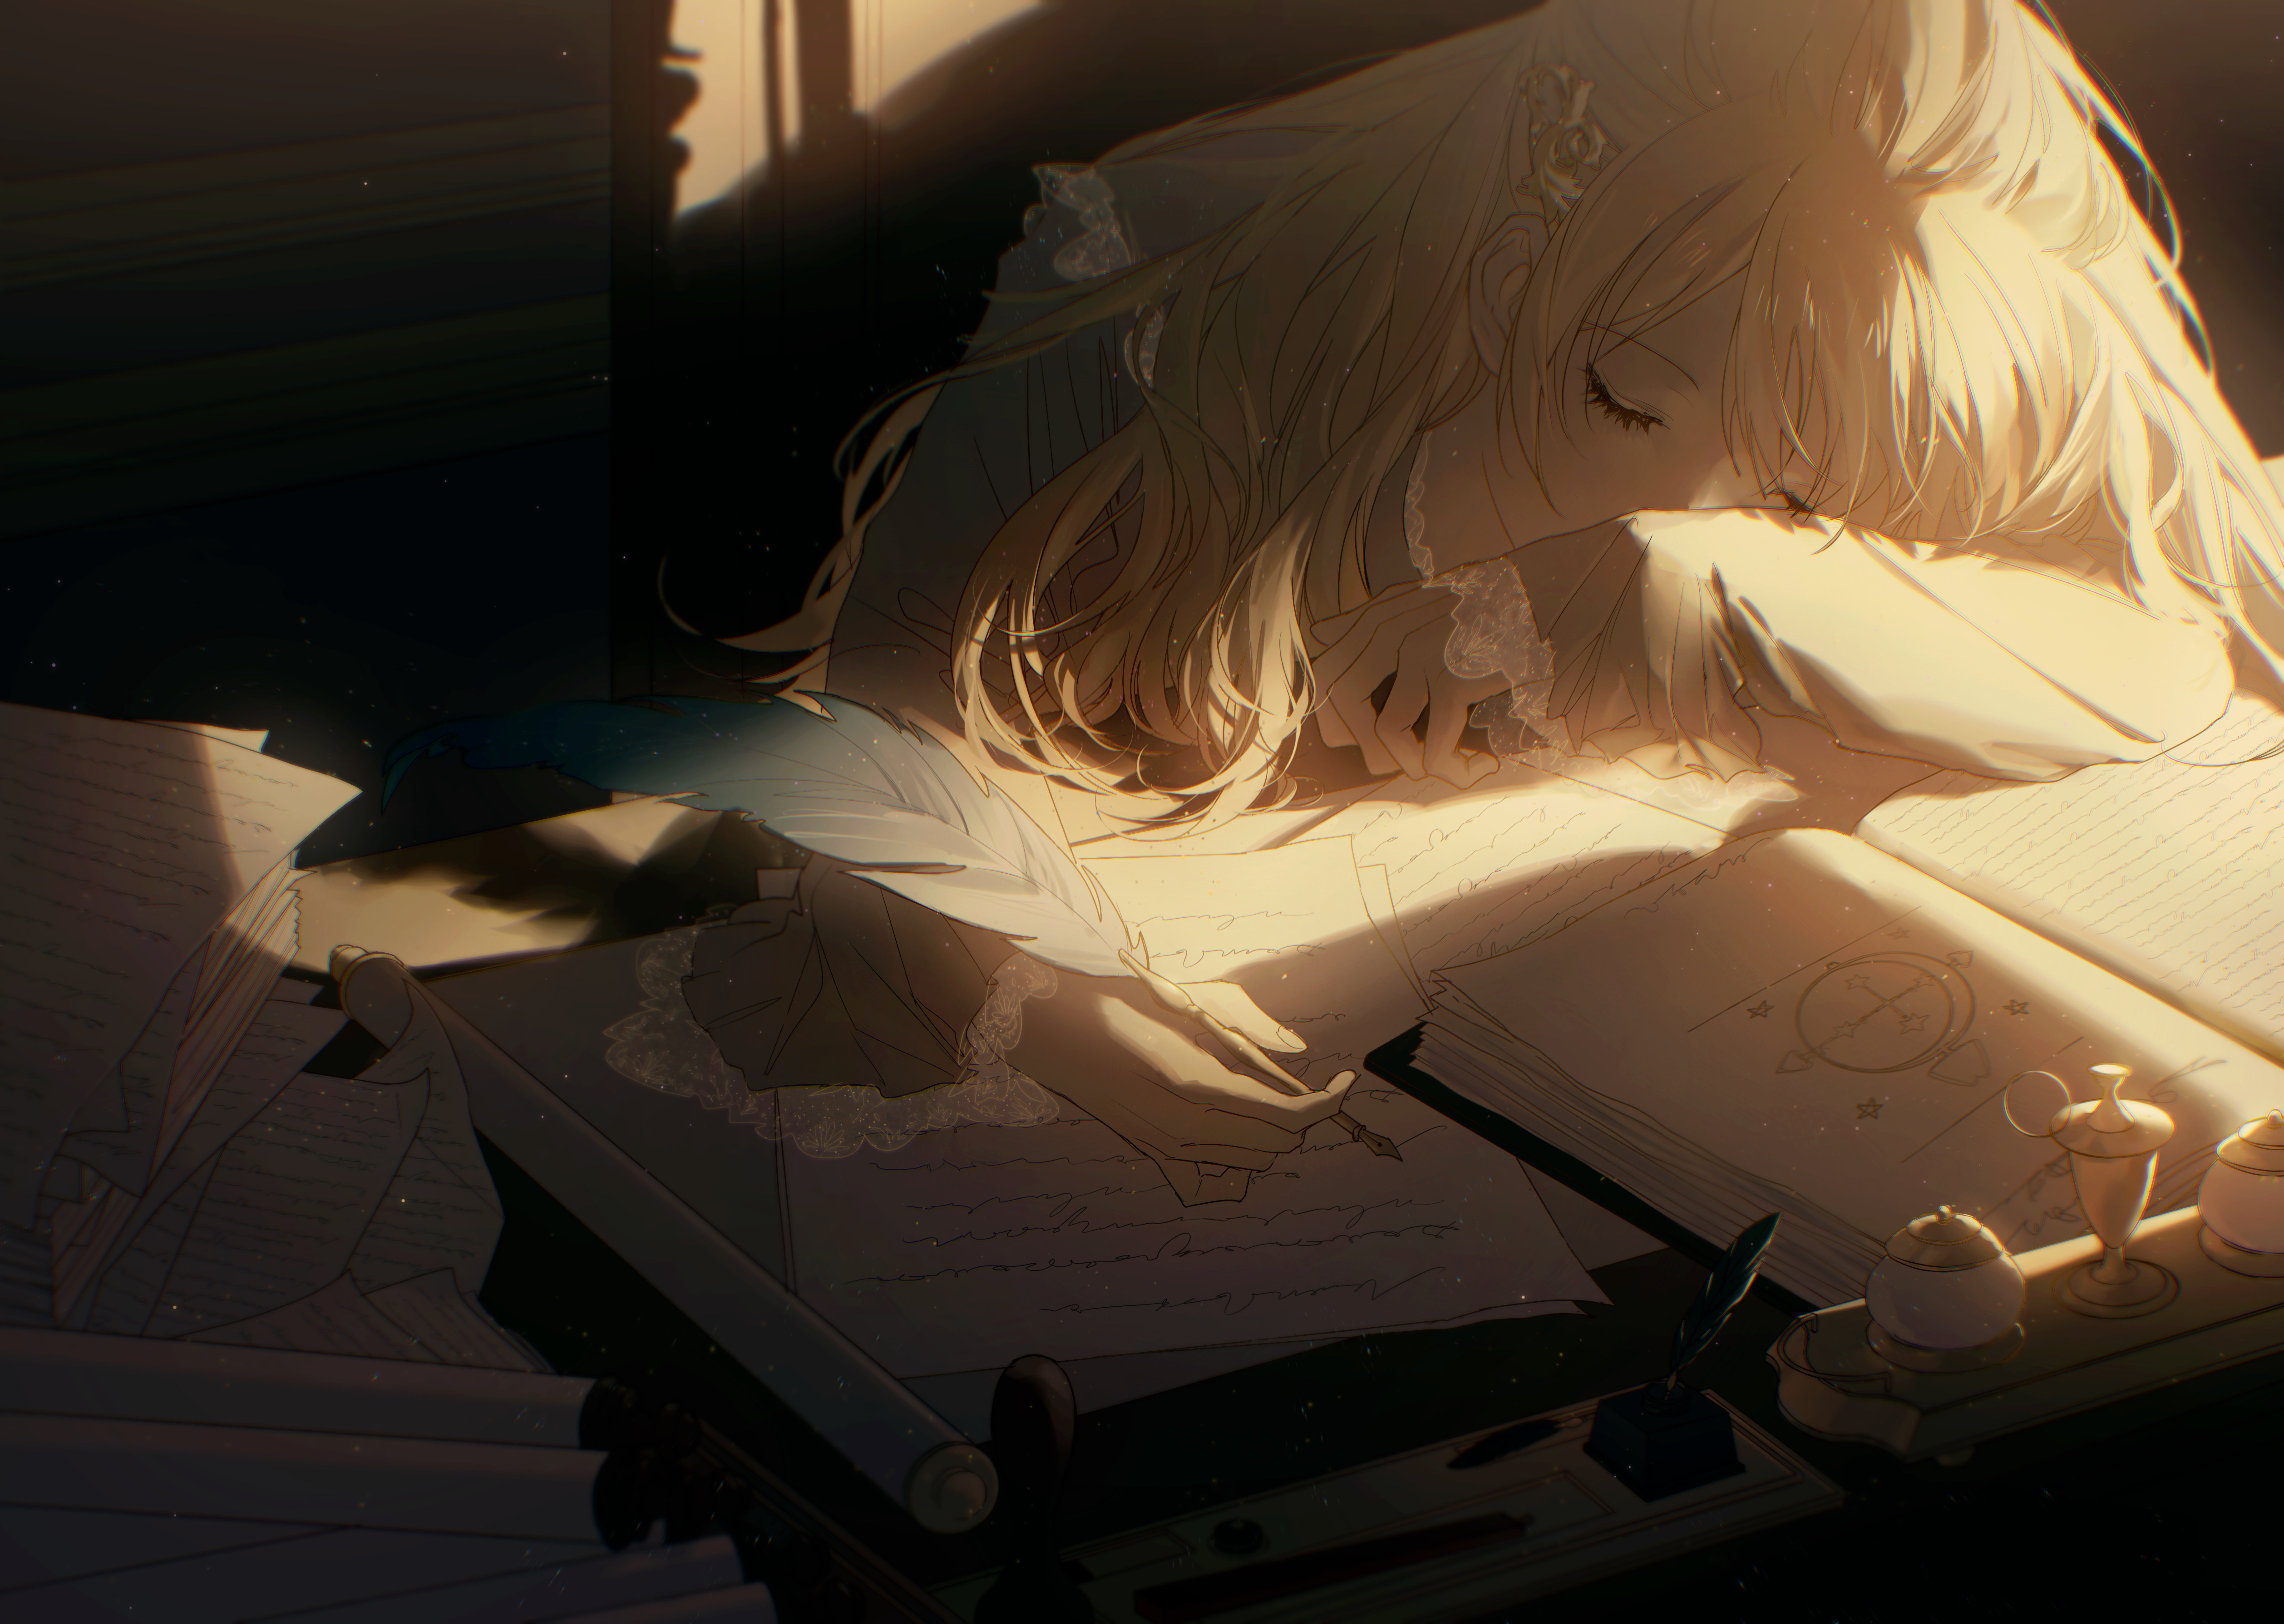 Anime Anime Girls Blonde Long Hair Feathers Closed Eyes Sleeping Books Barrette Writing Table 5031x3578